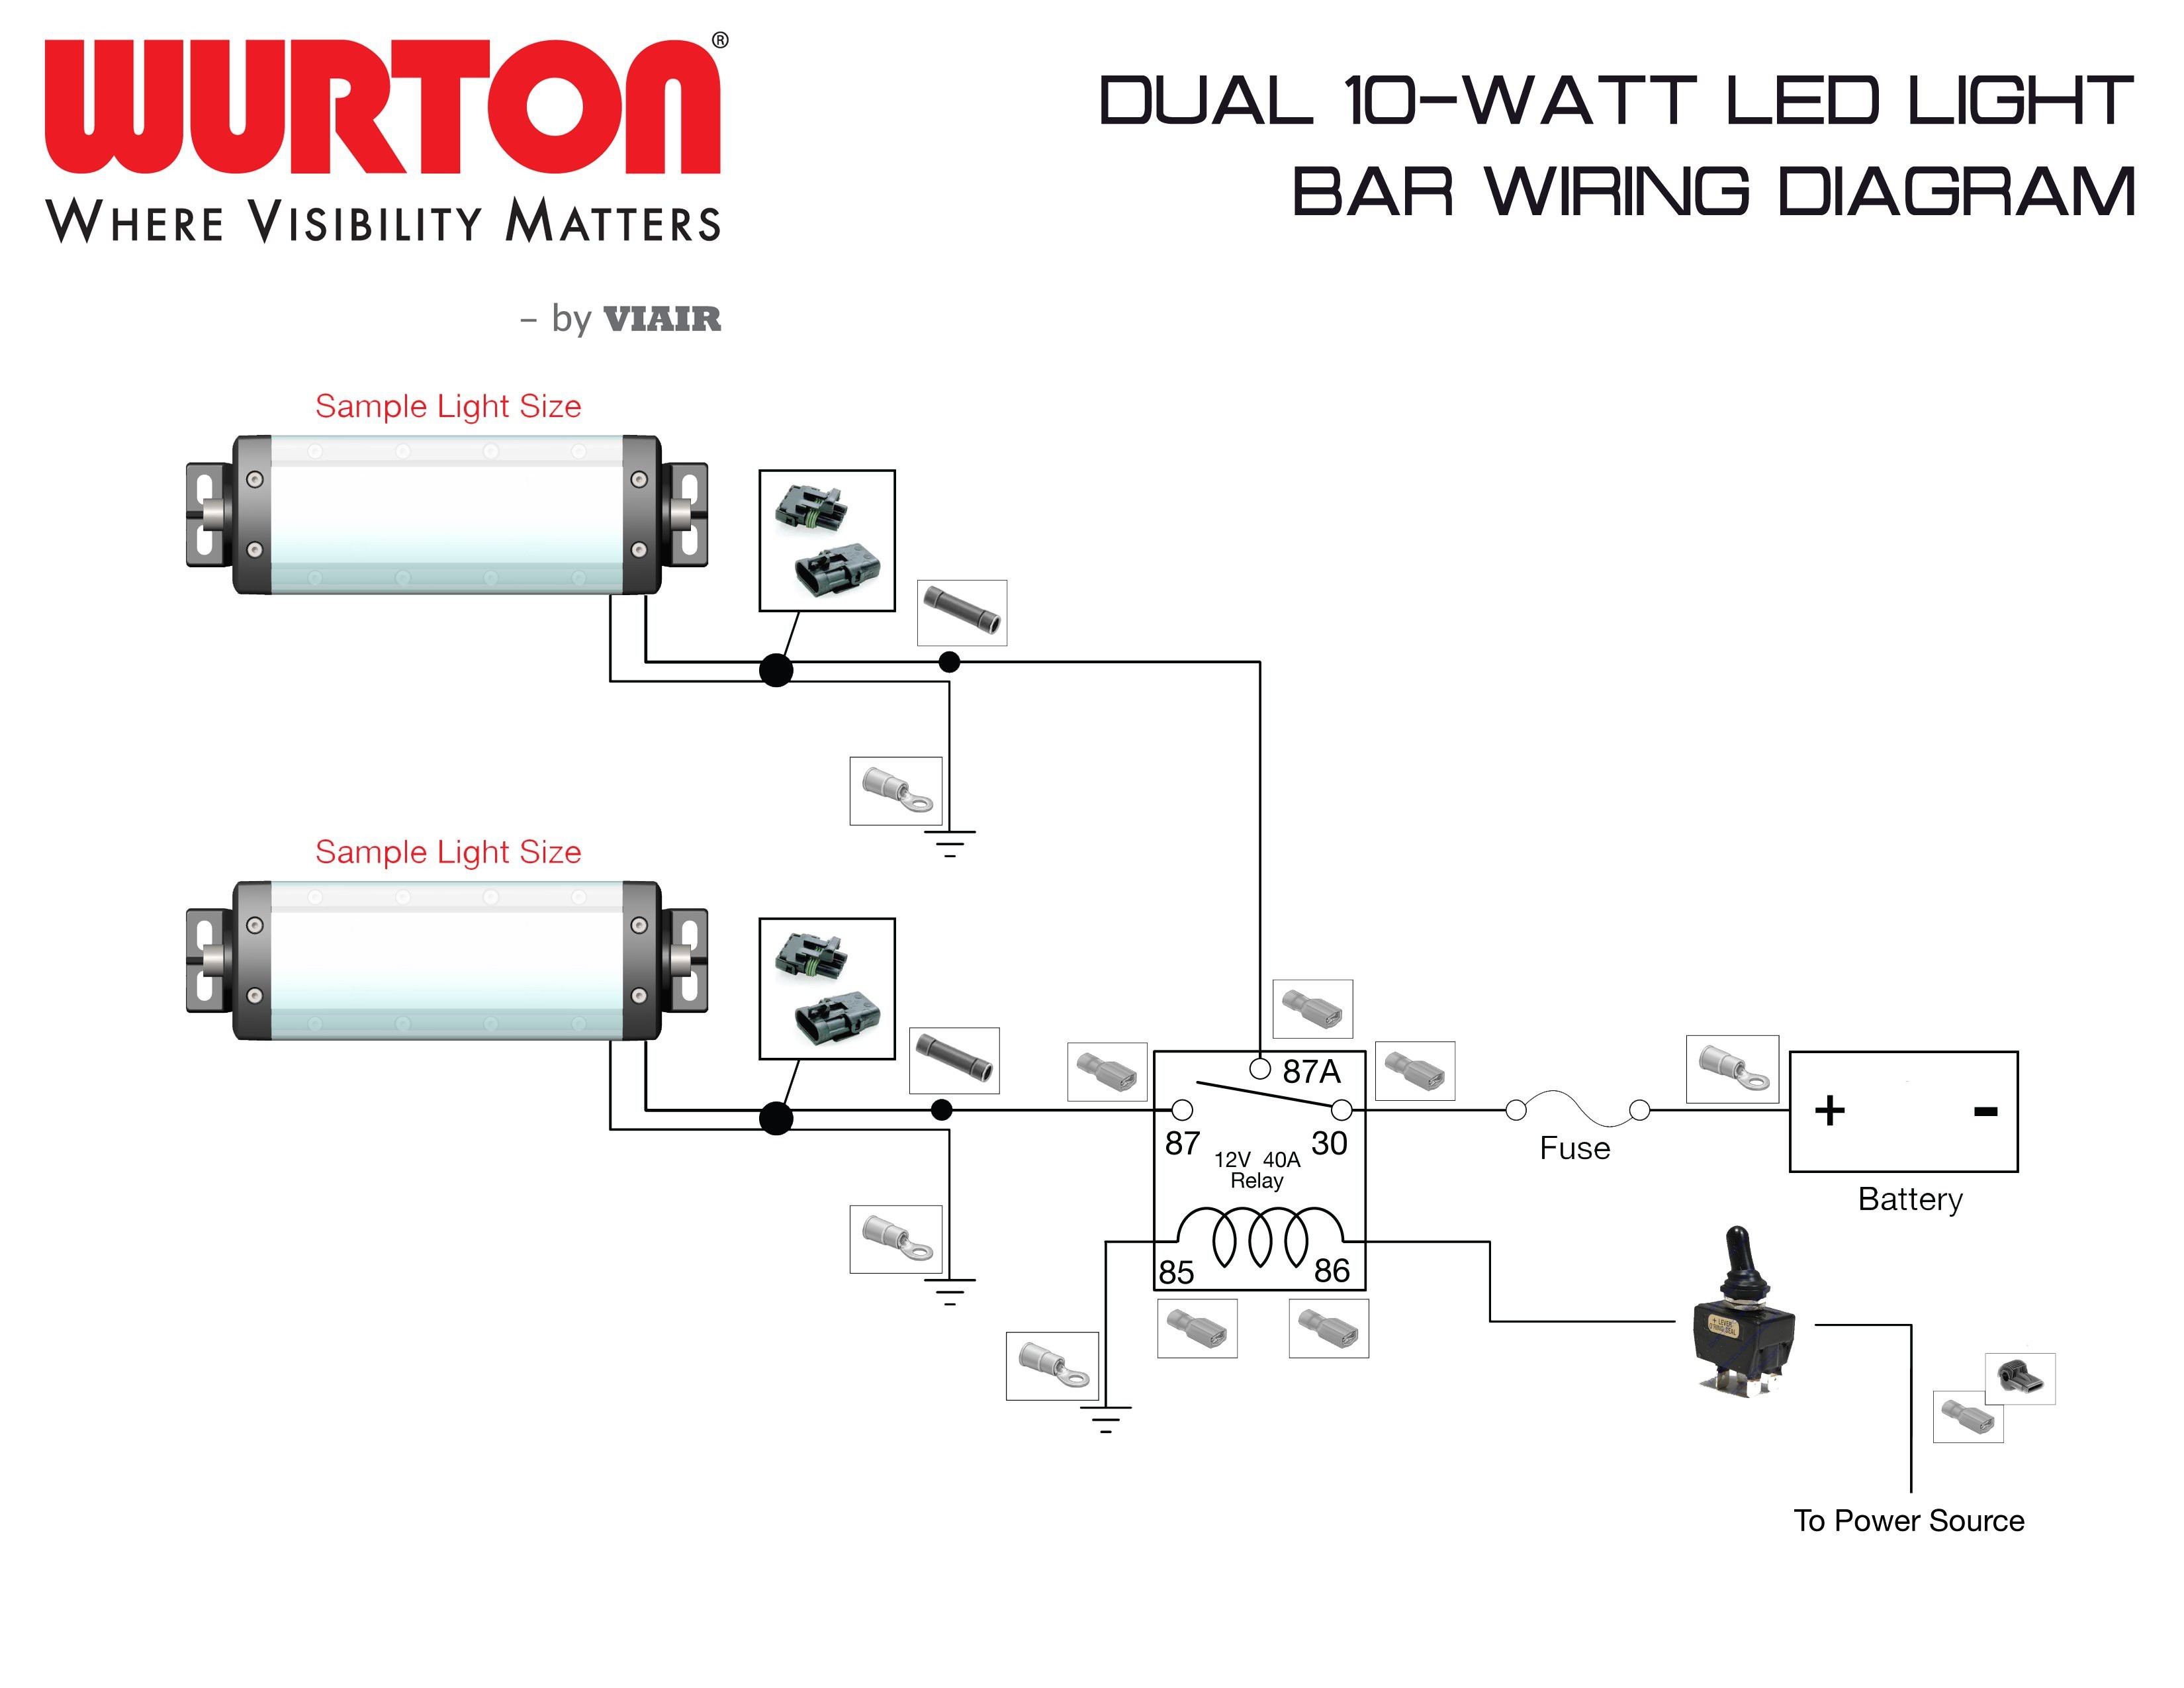 Wiring Diagrams Wurton froad LED Lighting With Light Bar Diagram